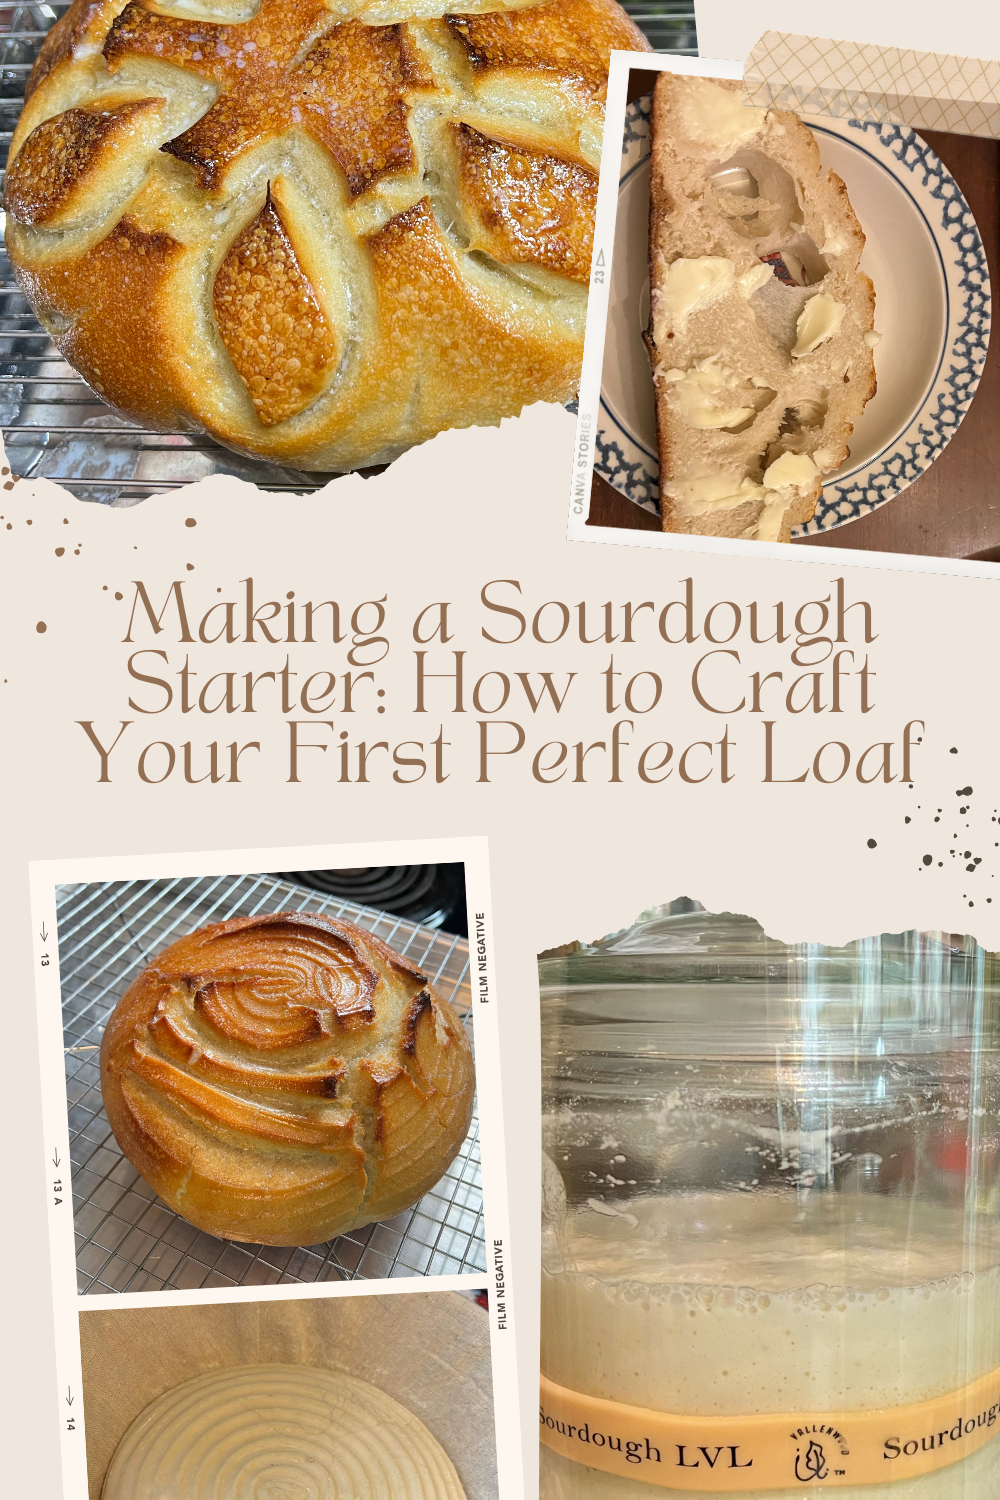 Various images of baked and unbaked sourdough boules plus sourdough starter.